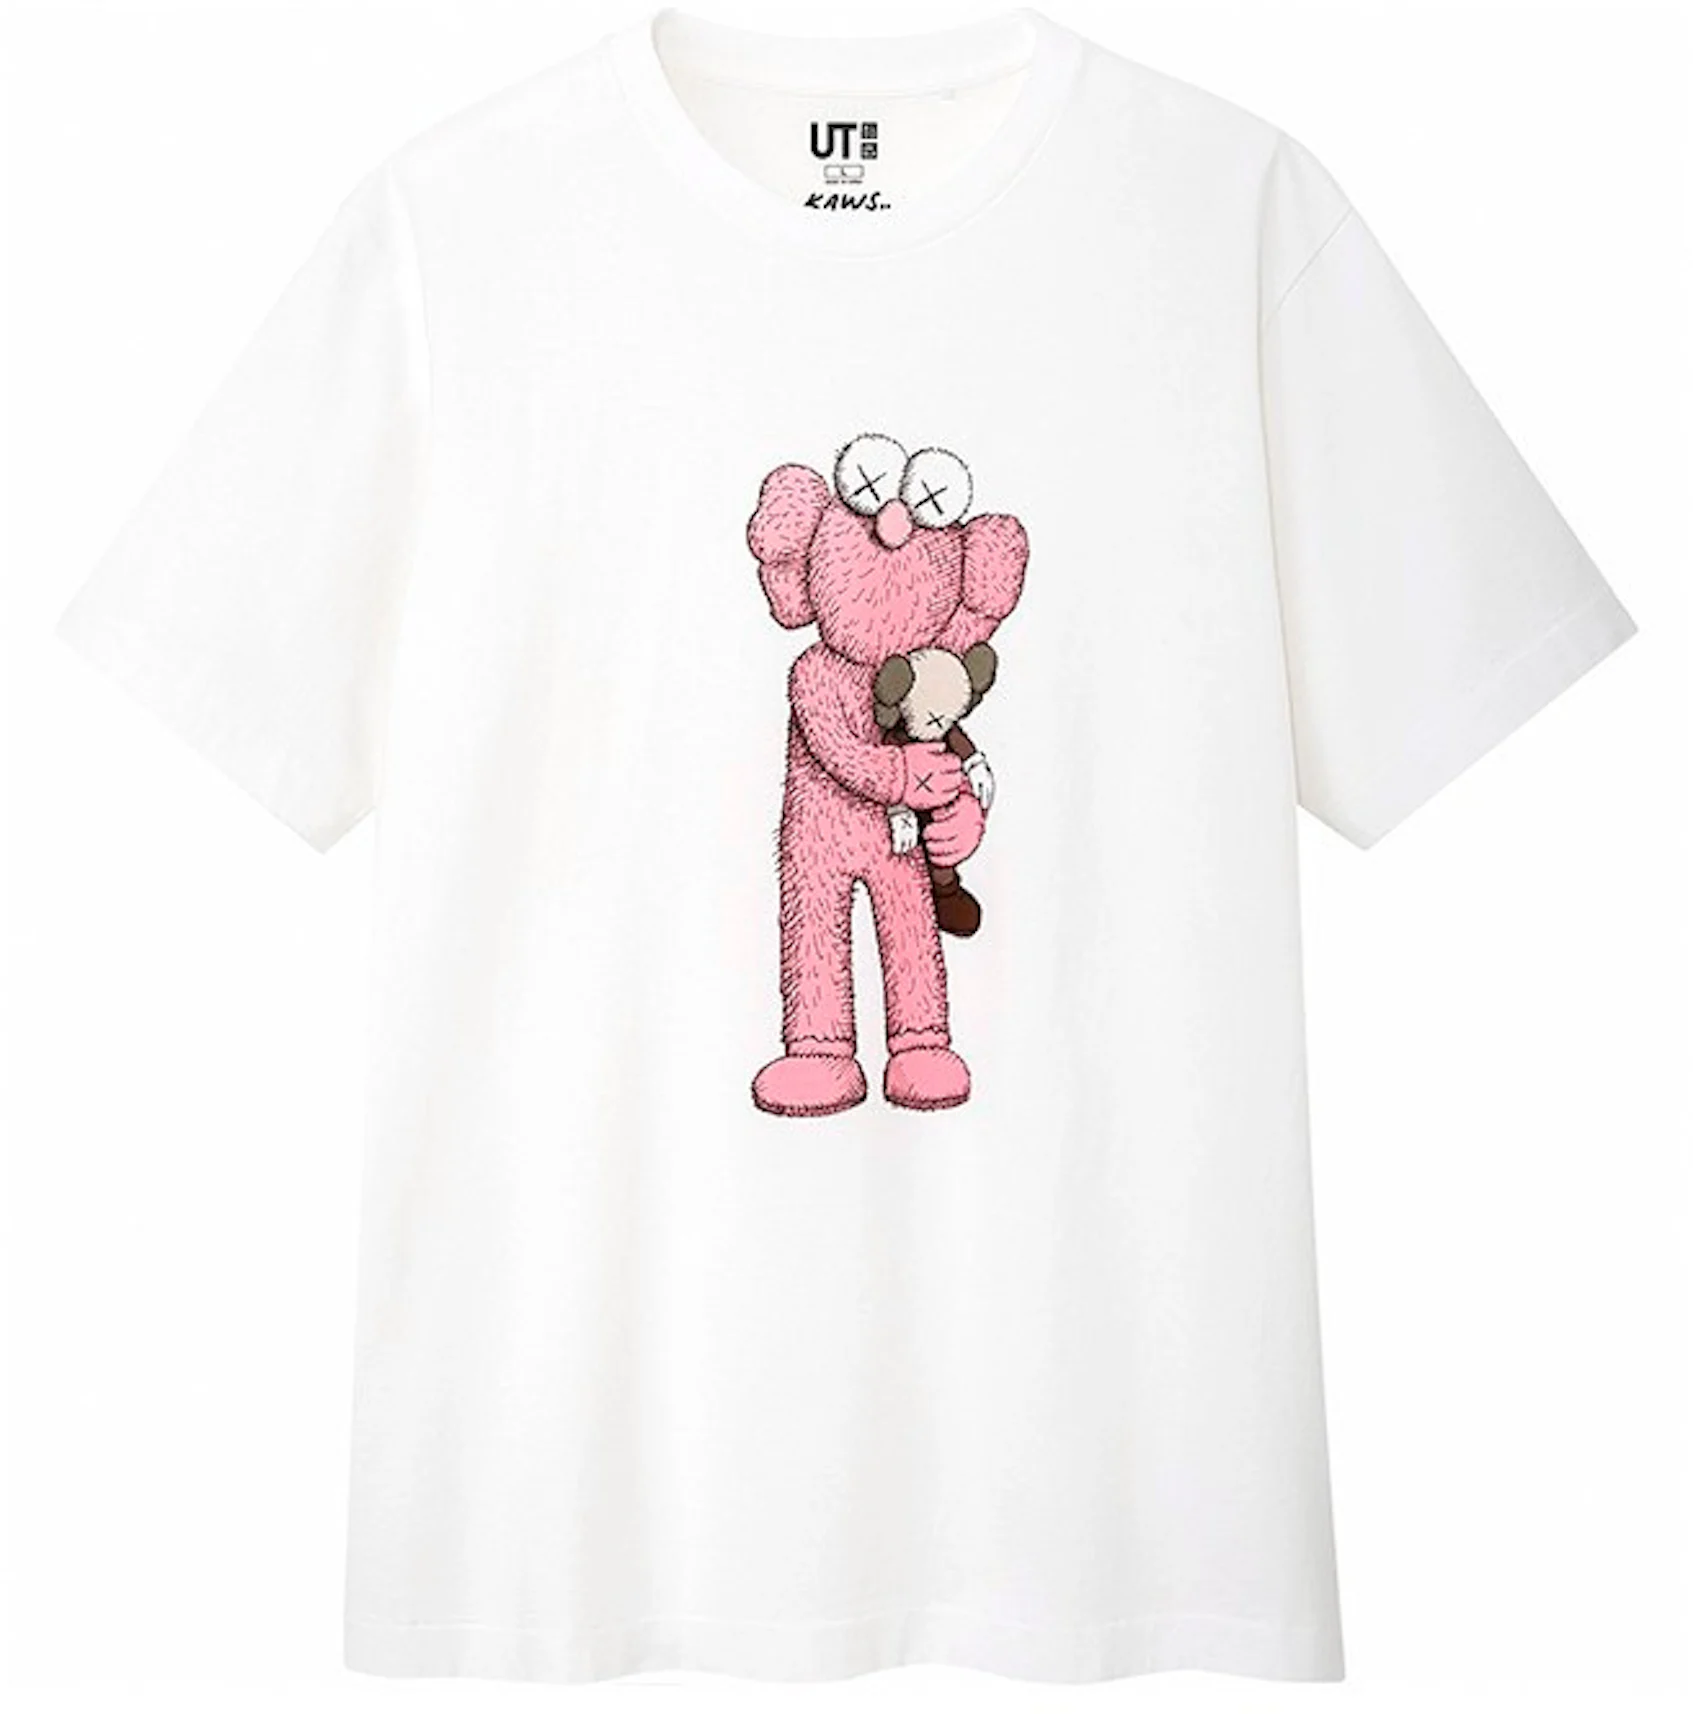 https://images.stockx.com/images/KAWS-x-Uniqlo-Pink-BFF-Tee-White.jpg?fit=fill&bg=FFFFFF&w=1200&h=857&fm=webp&auto=compress&dpr=2&trim=color&updated_at=1614787326&q=60